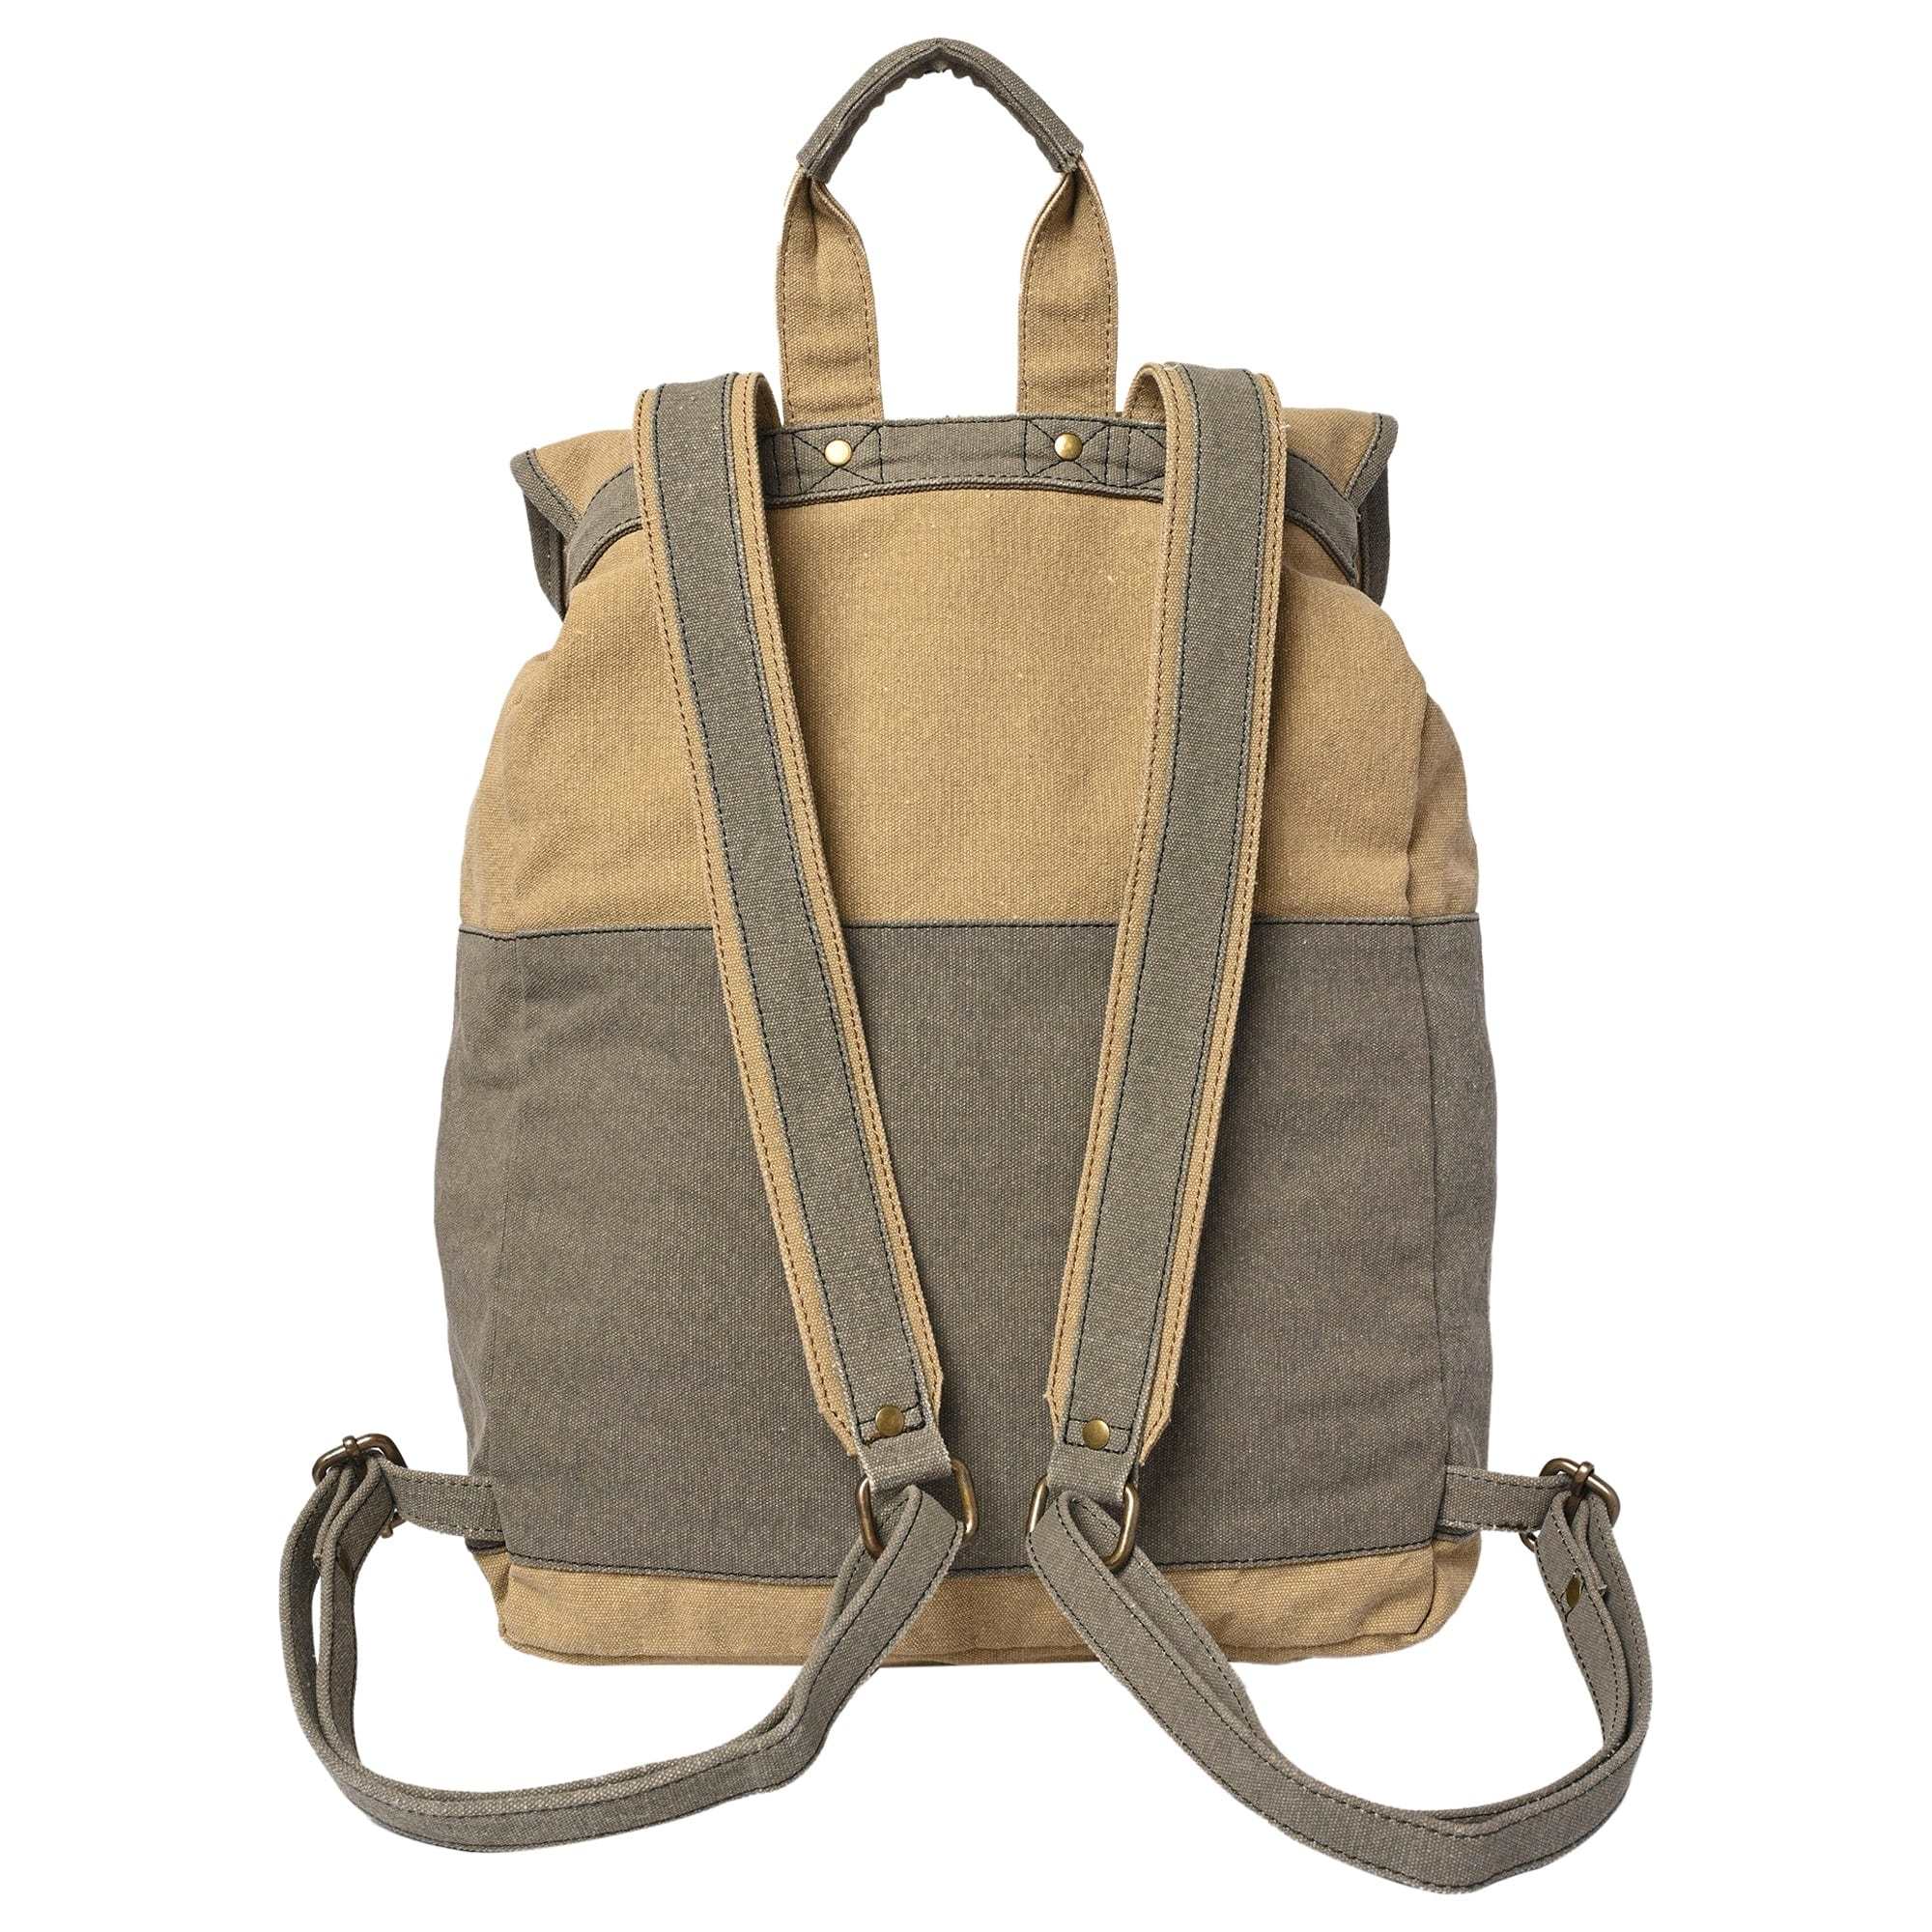 Mona-B Bag Mona B - Stone 100% Cotton Canvas Back Pack for Offices Schools and Colleges with Two Outside Pockets and Stylish Design for Men and Women